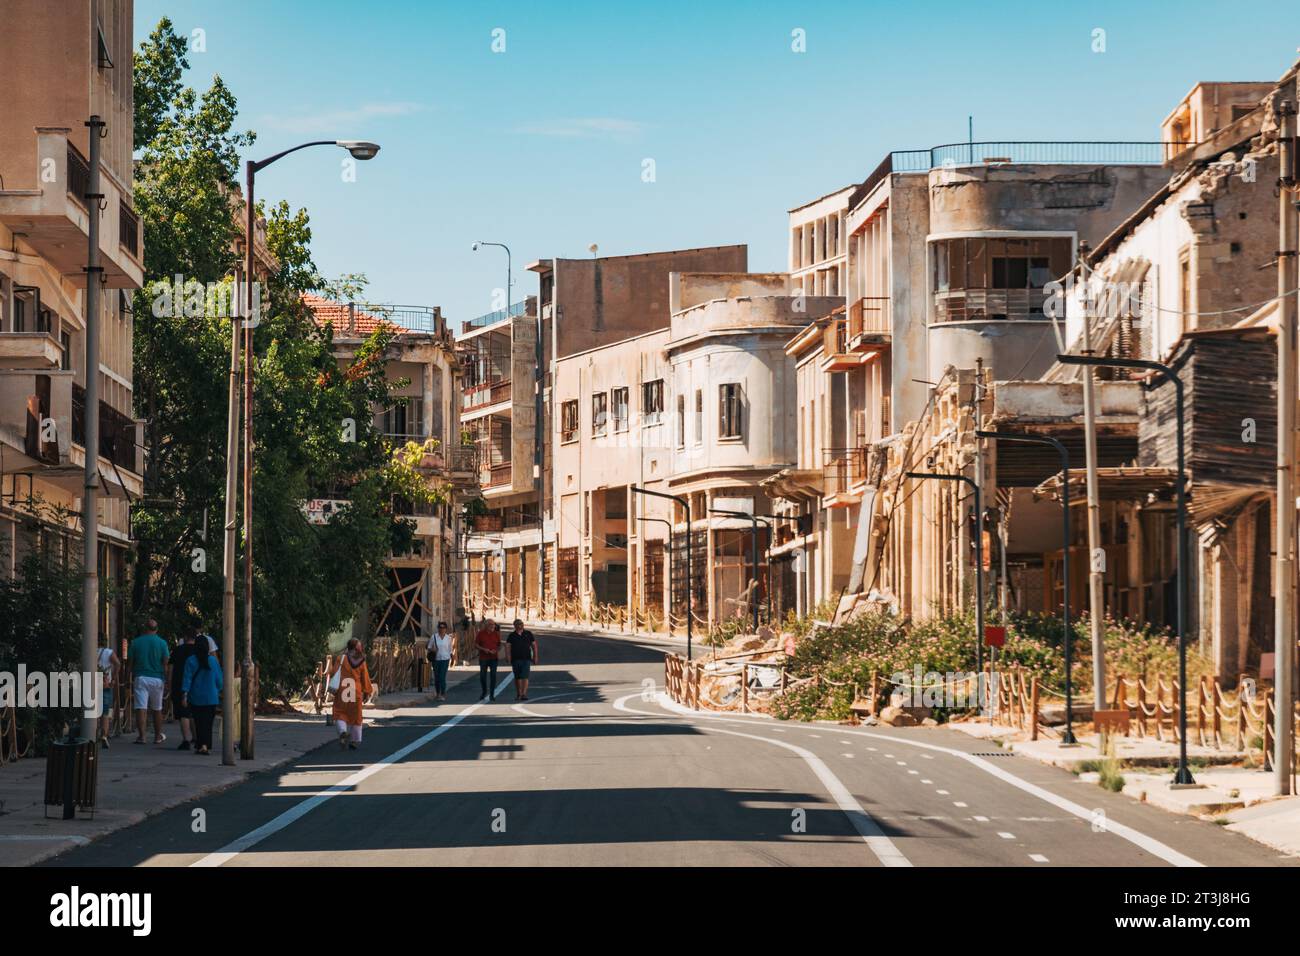 newly paved street in the ghost town of Varosha, Northern Cyprus, which opened to tourists in 2020 after being closed to the public for over 40 years Stock Photo